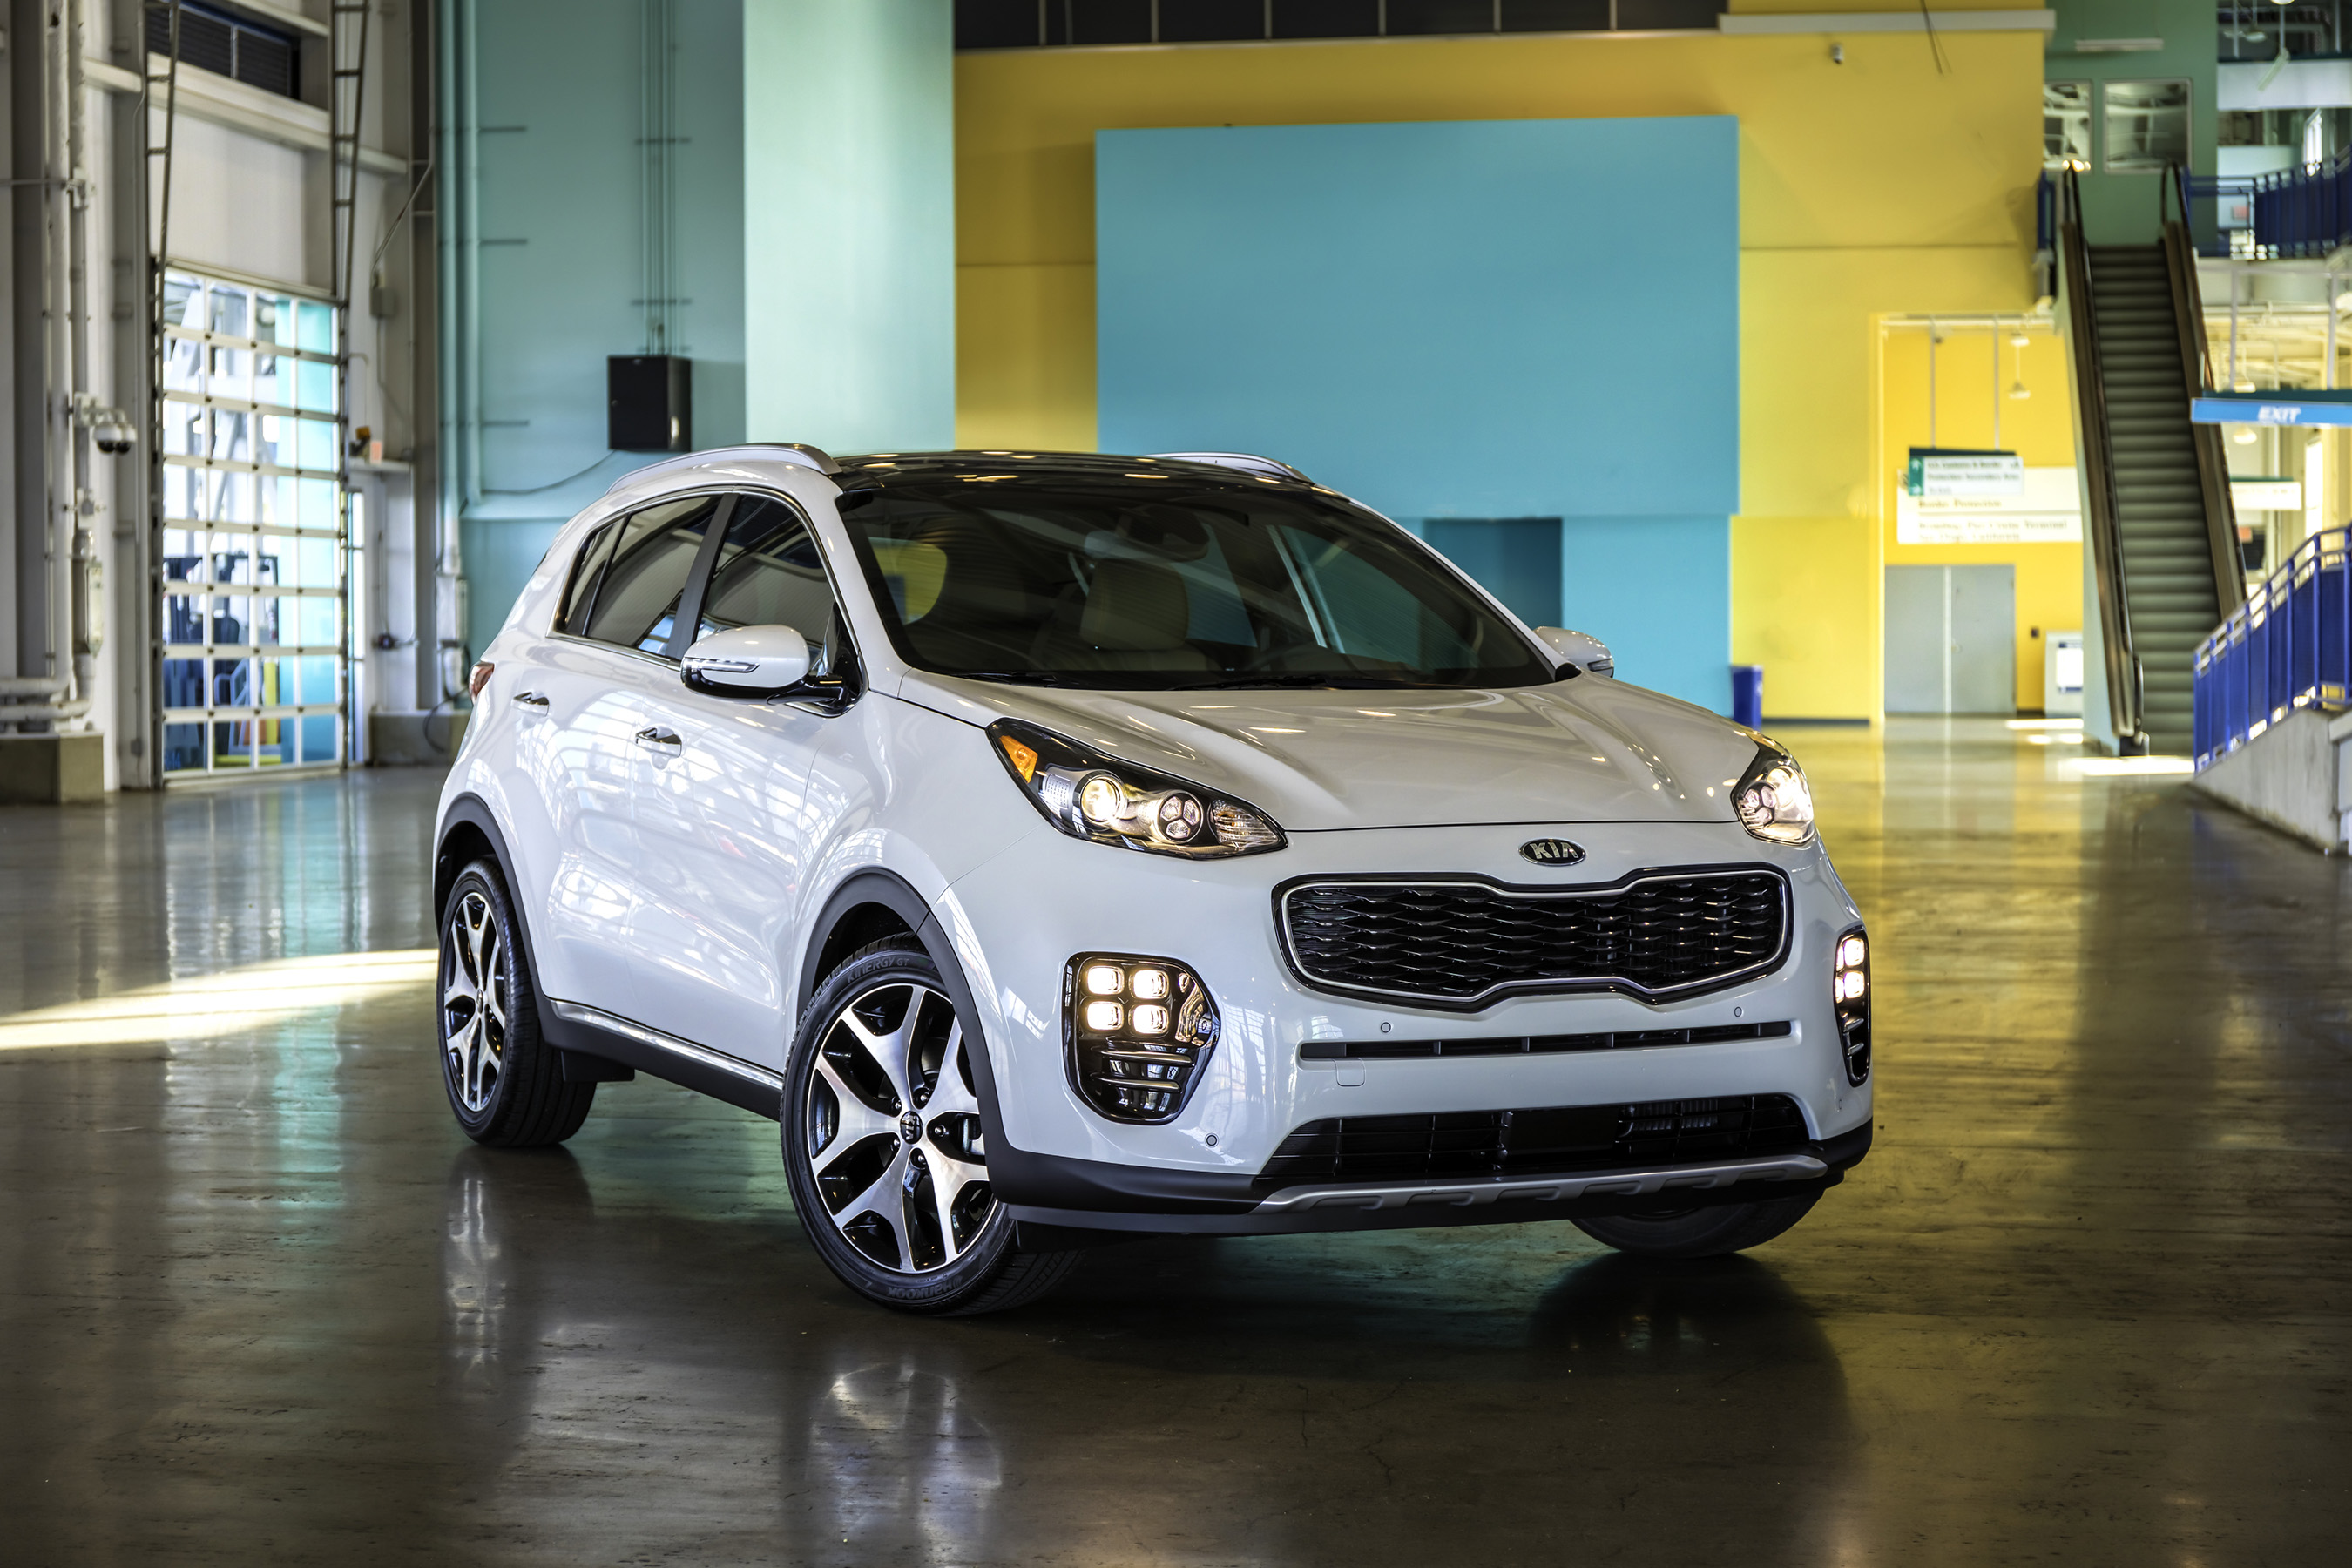 The all-new 2017 Kia Sportage features cutting-edge design, engaging driving dynamics and intelligent packaging.